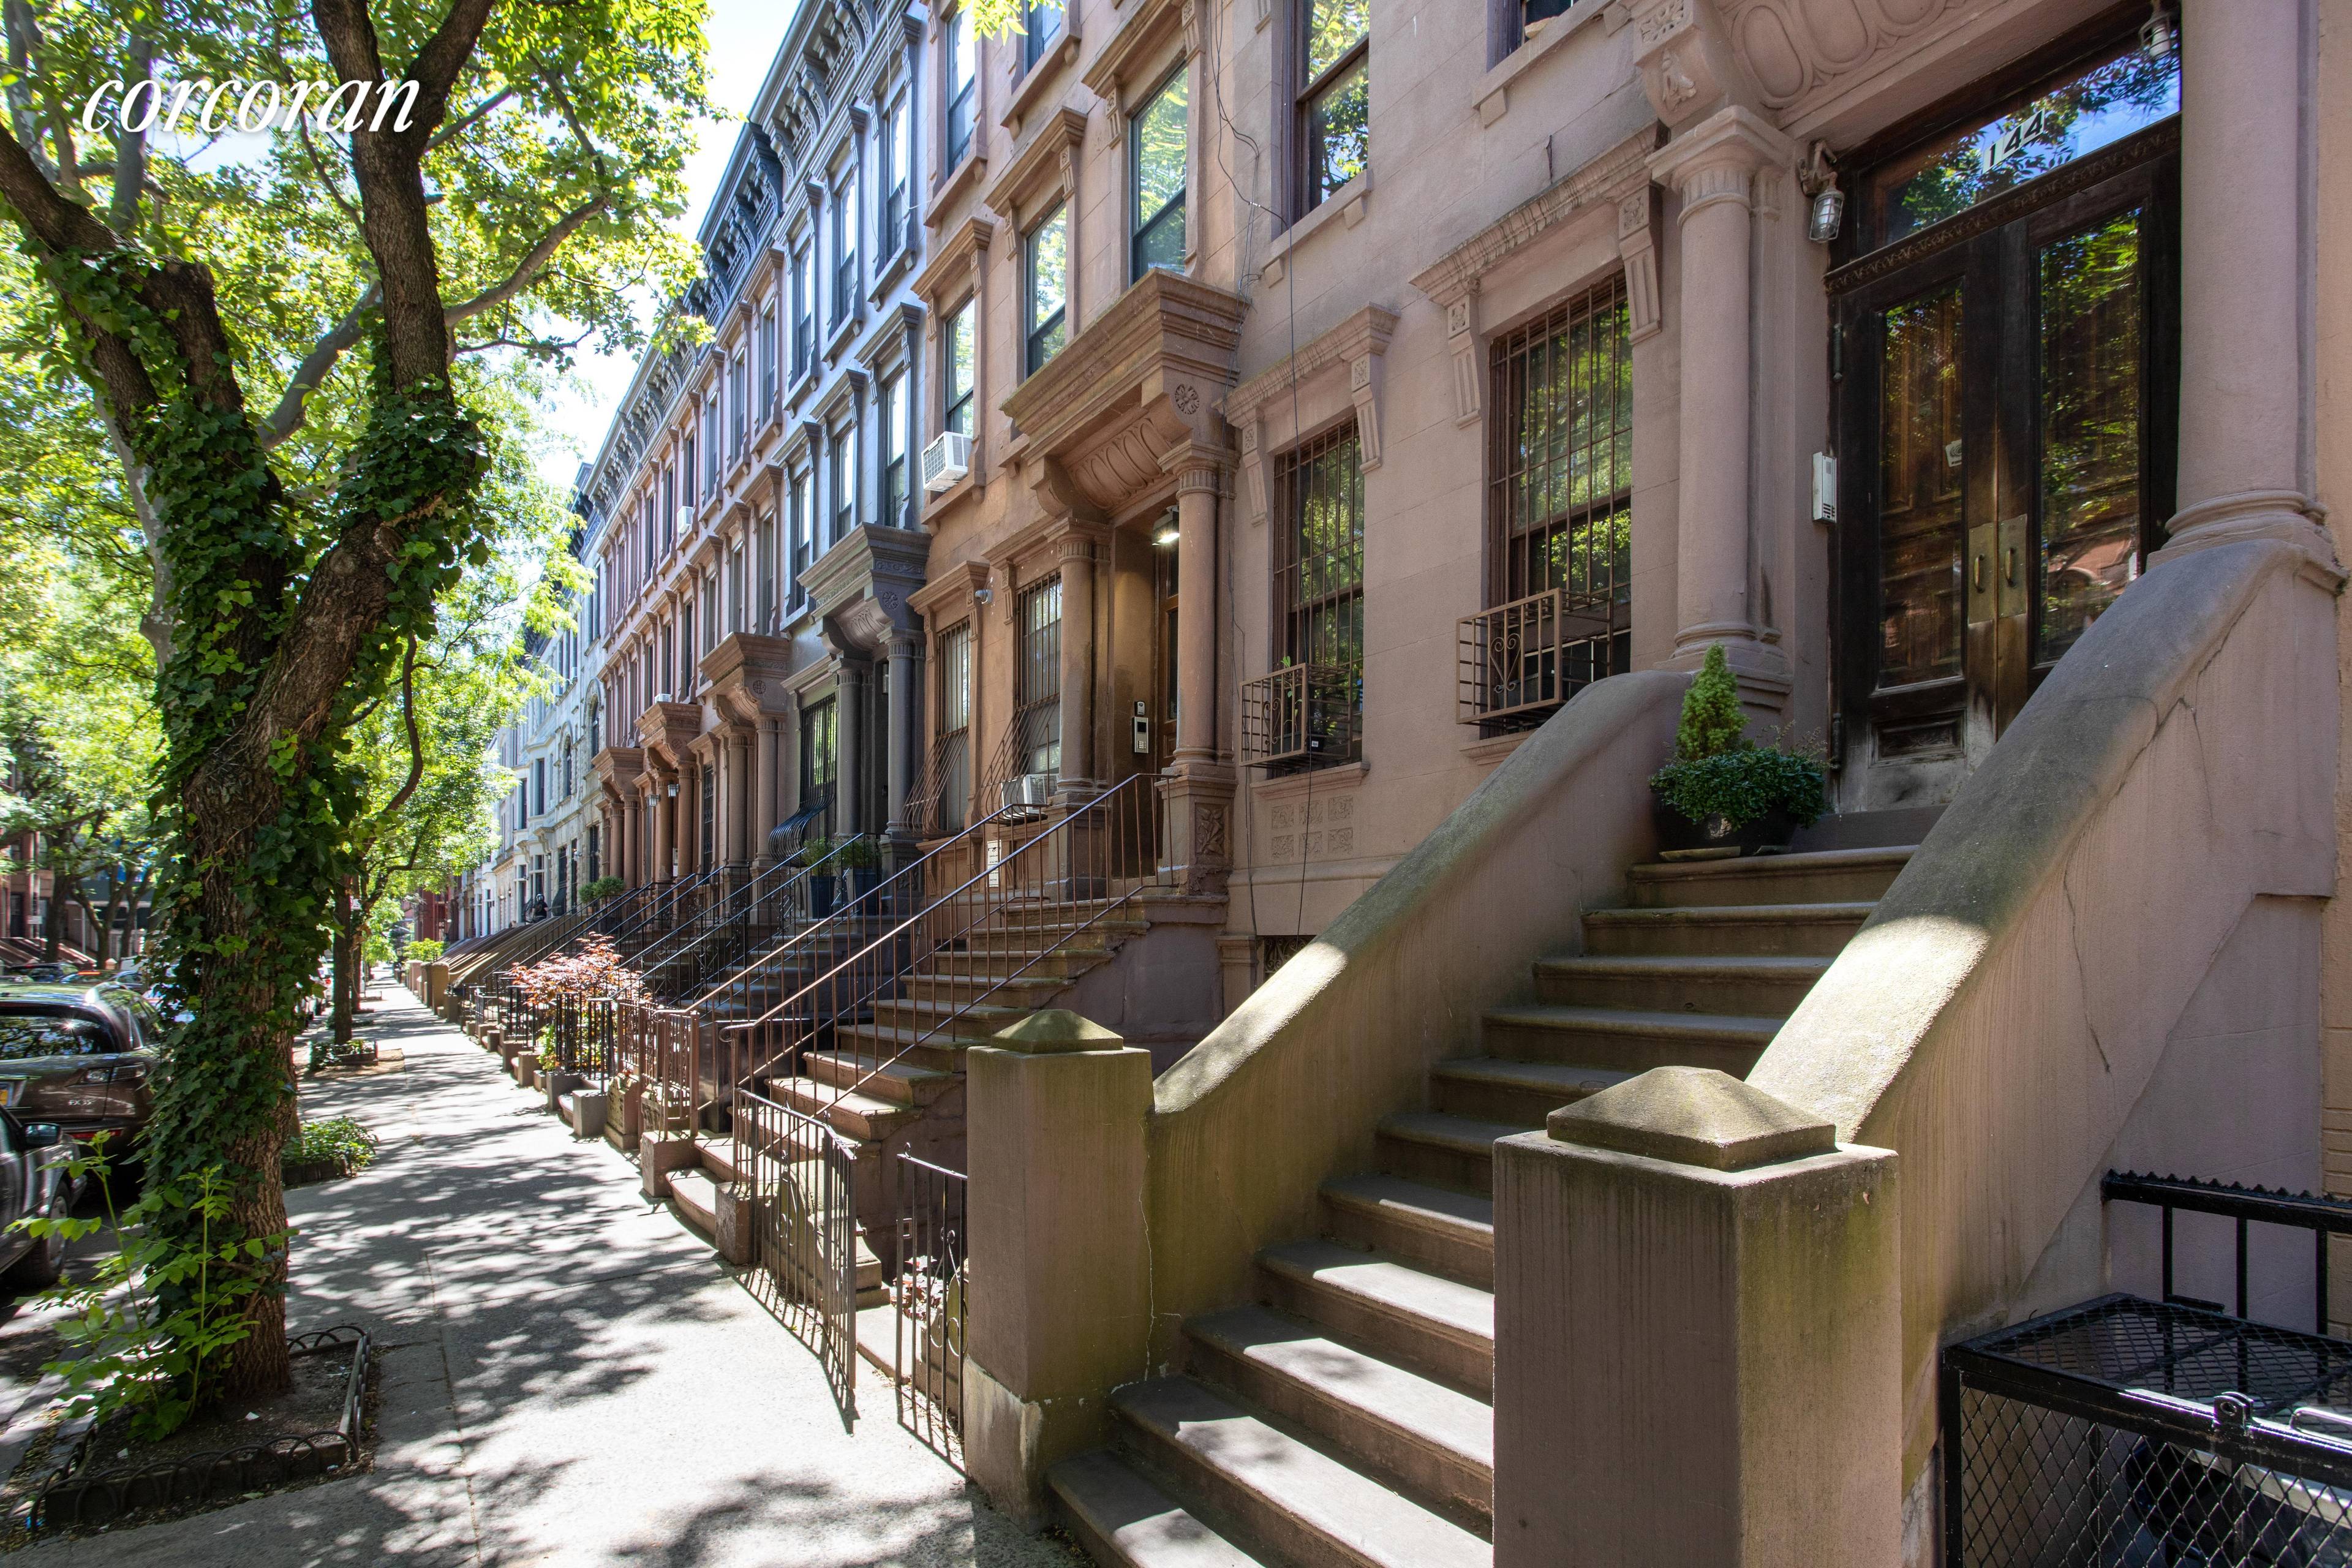 Welcome home to an historic Harlem brownstone located on one of the most desired blocks in the Mount Morris Park Historic District.